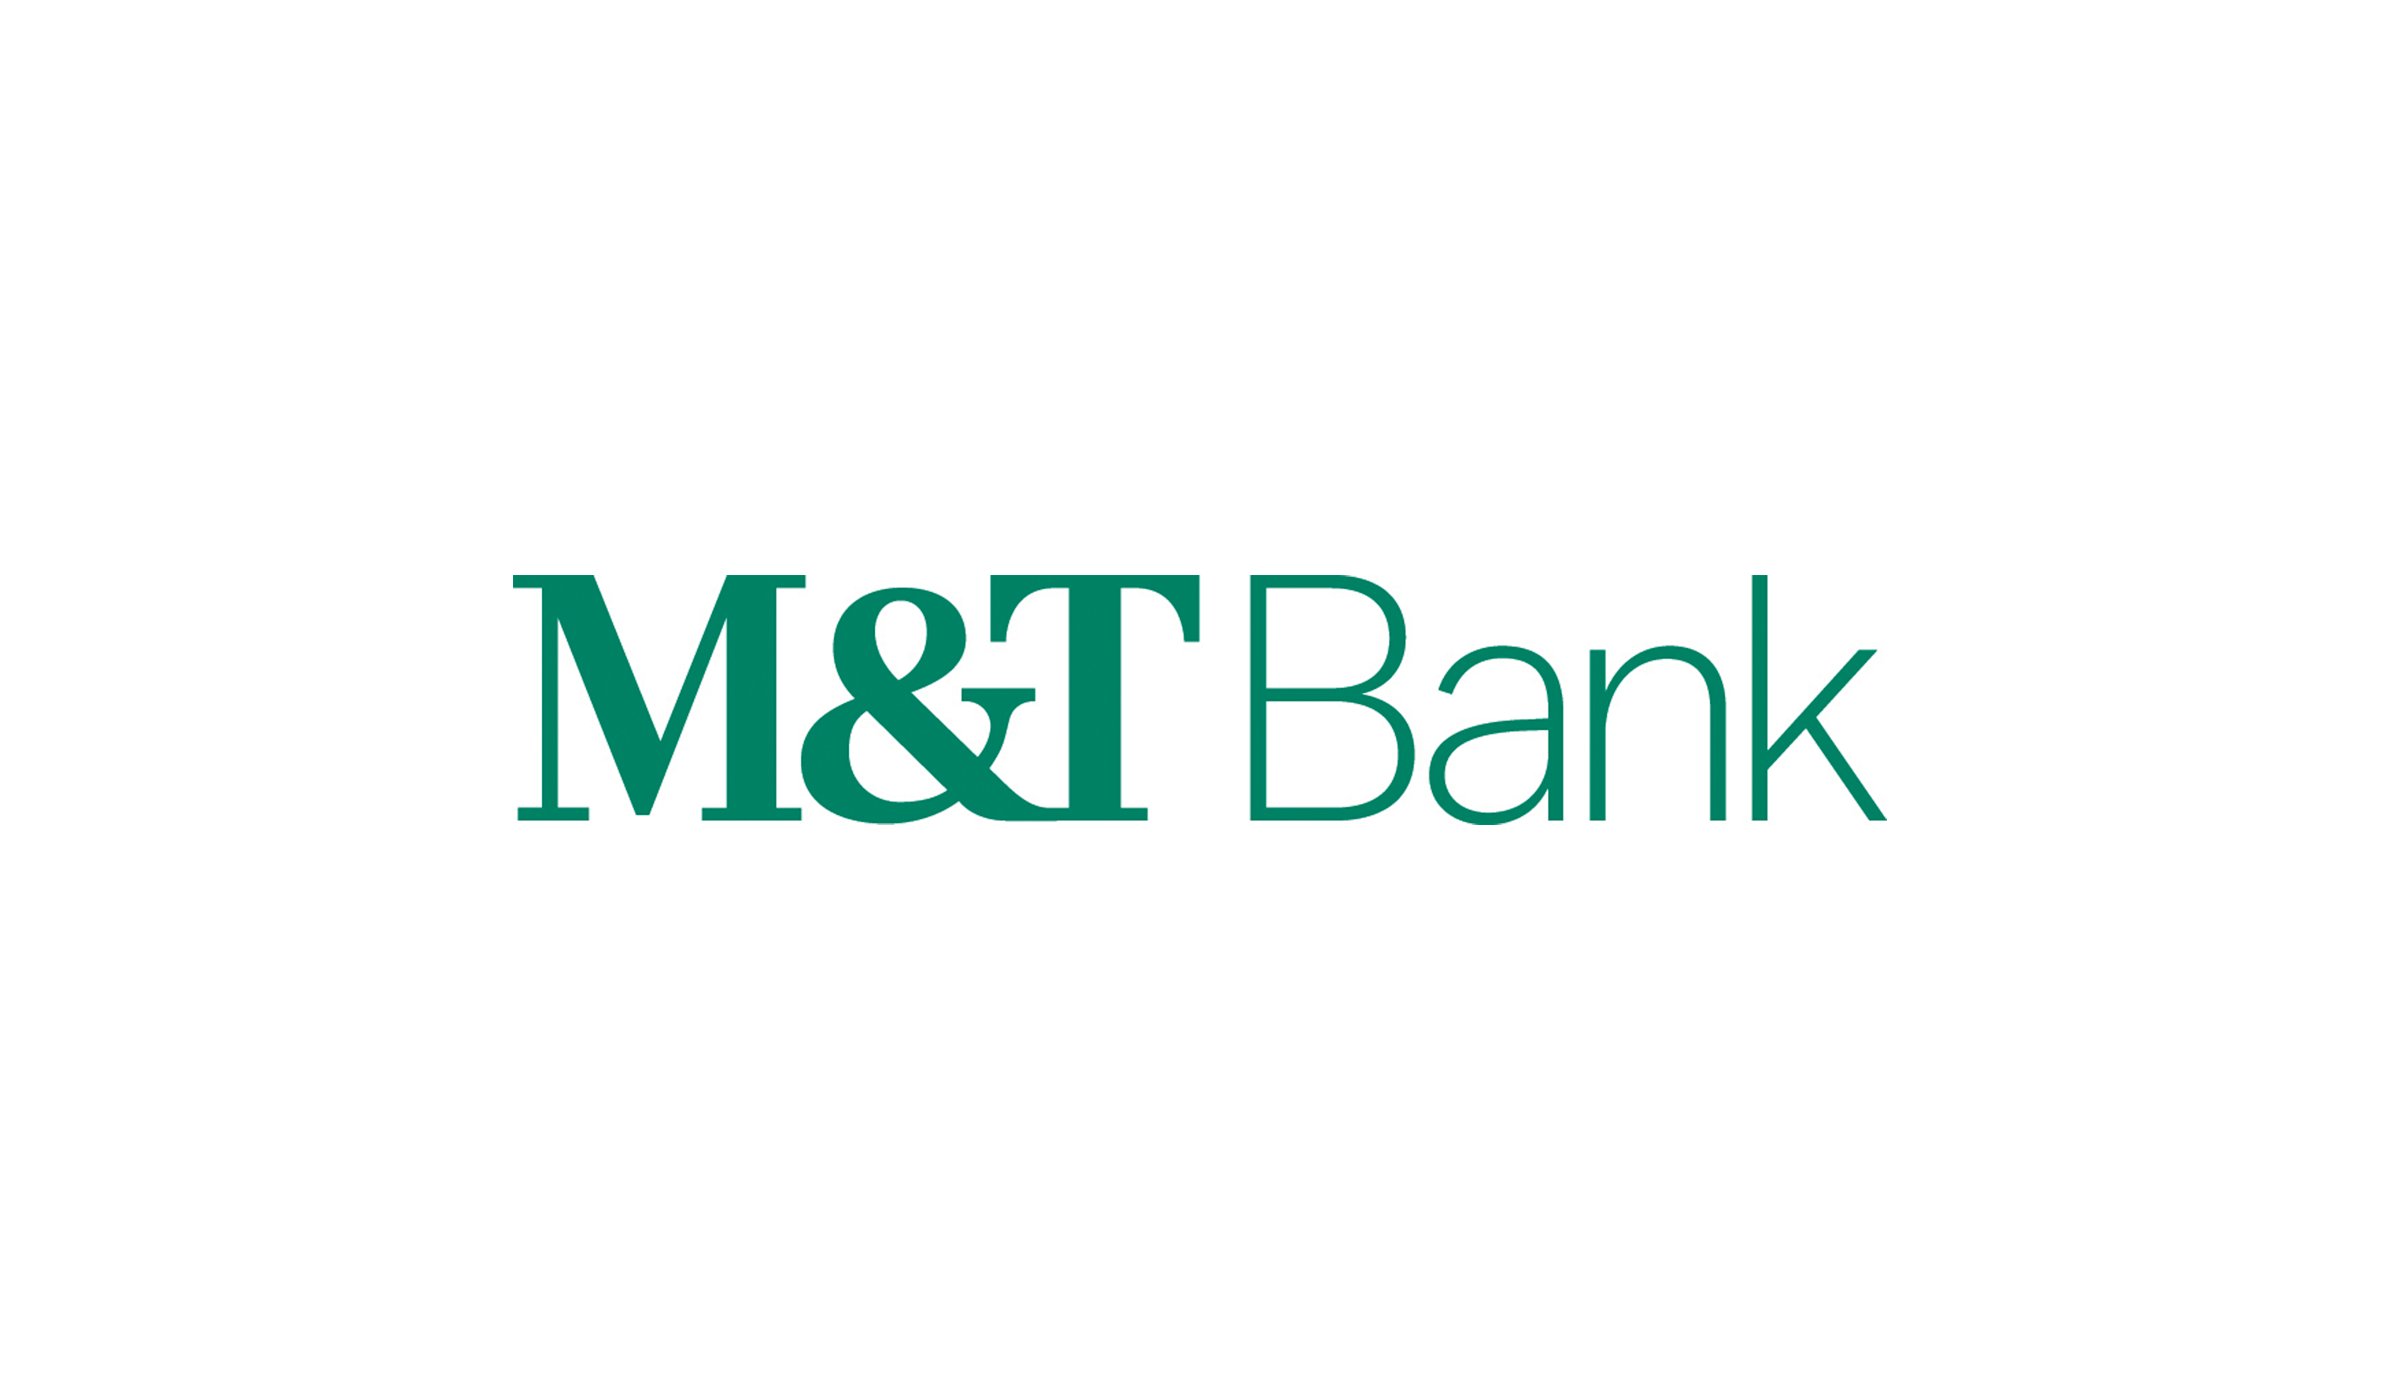 M&T Bank Joins the PMC as Co-Presenting Sponsor